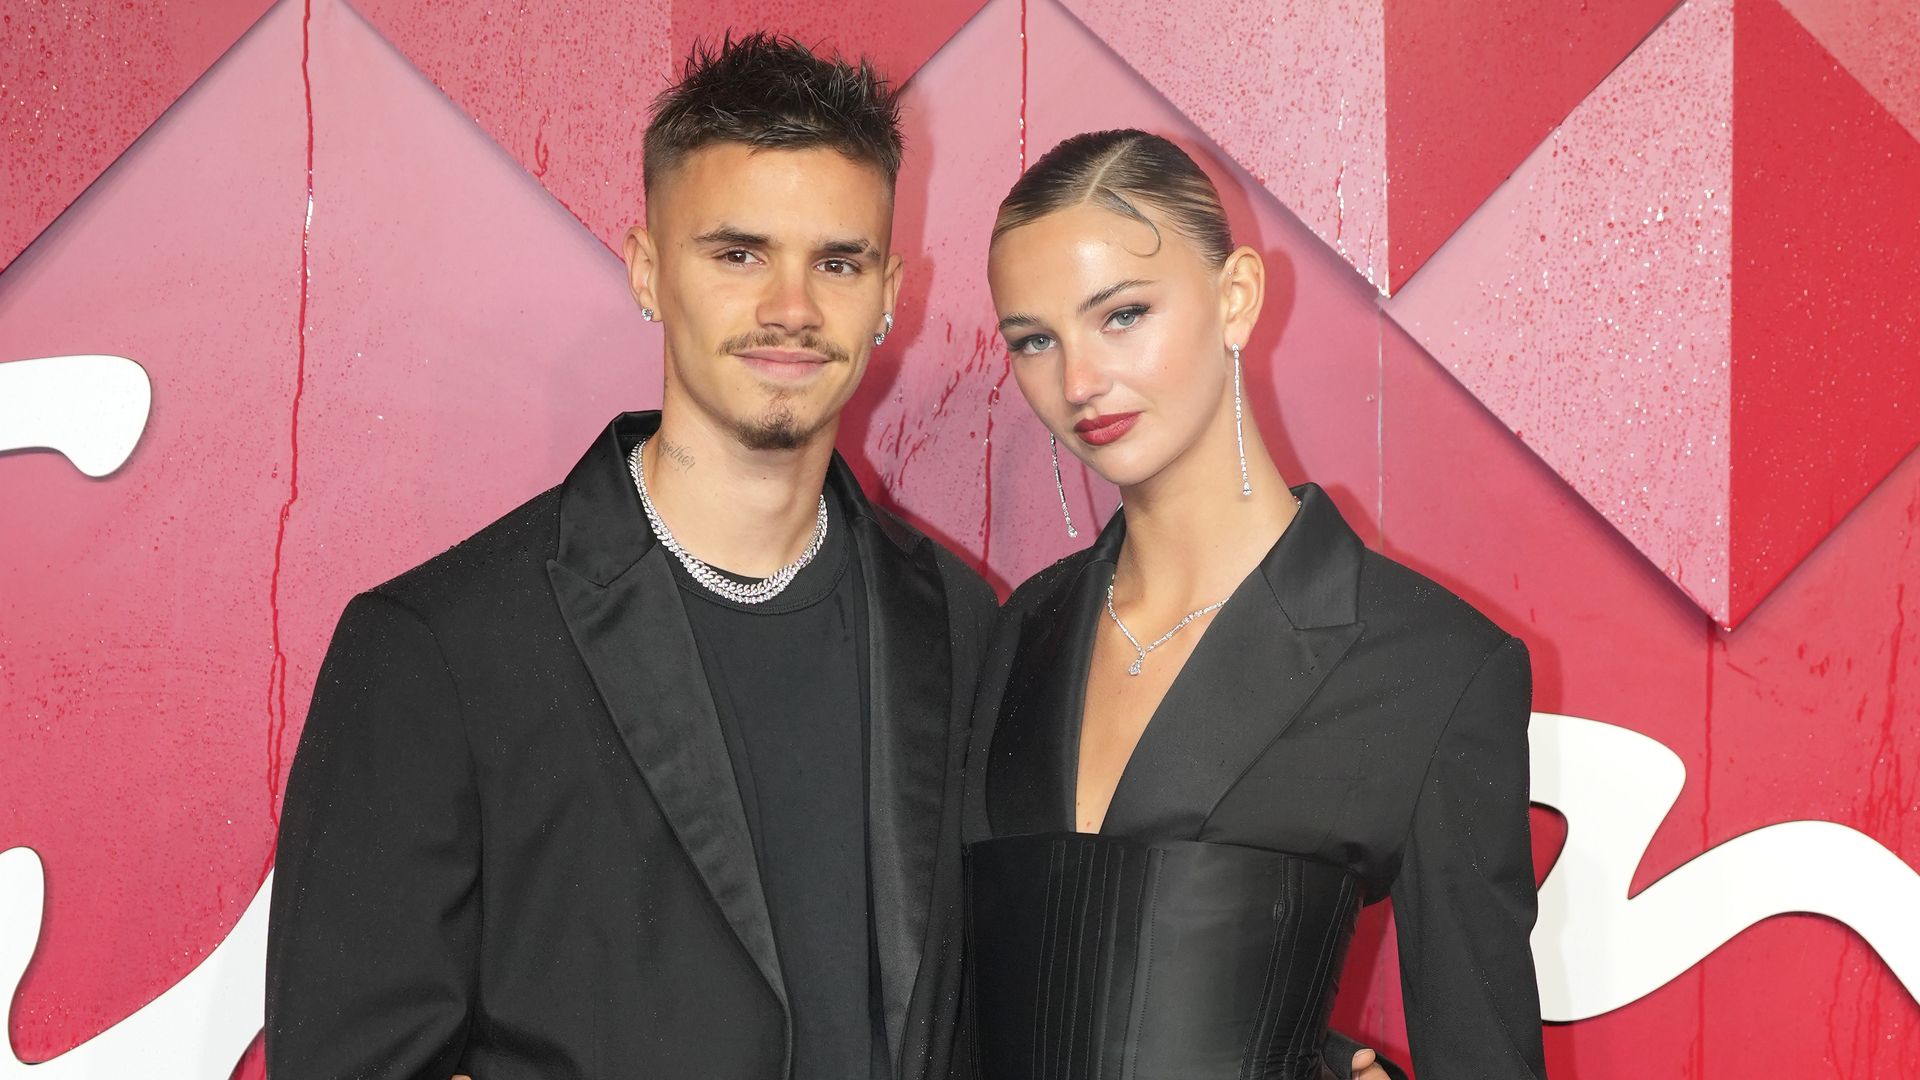 Romeo Beckham and Mia Regan on red carpet in black outfits